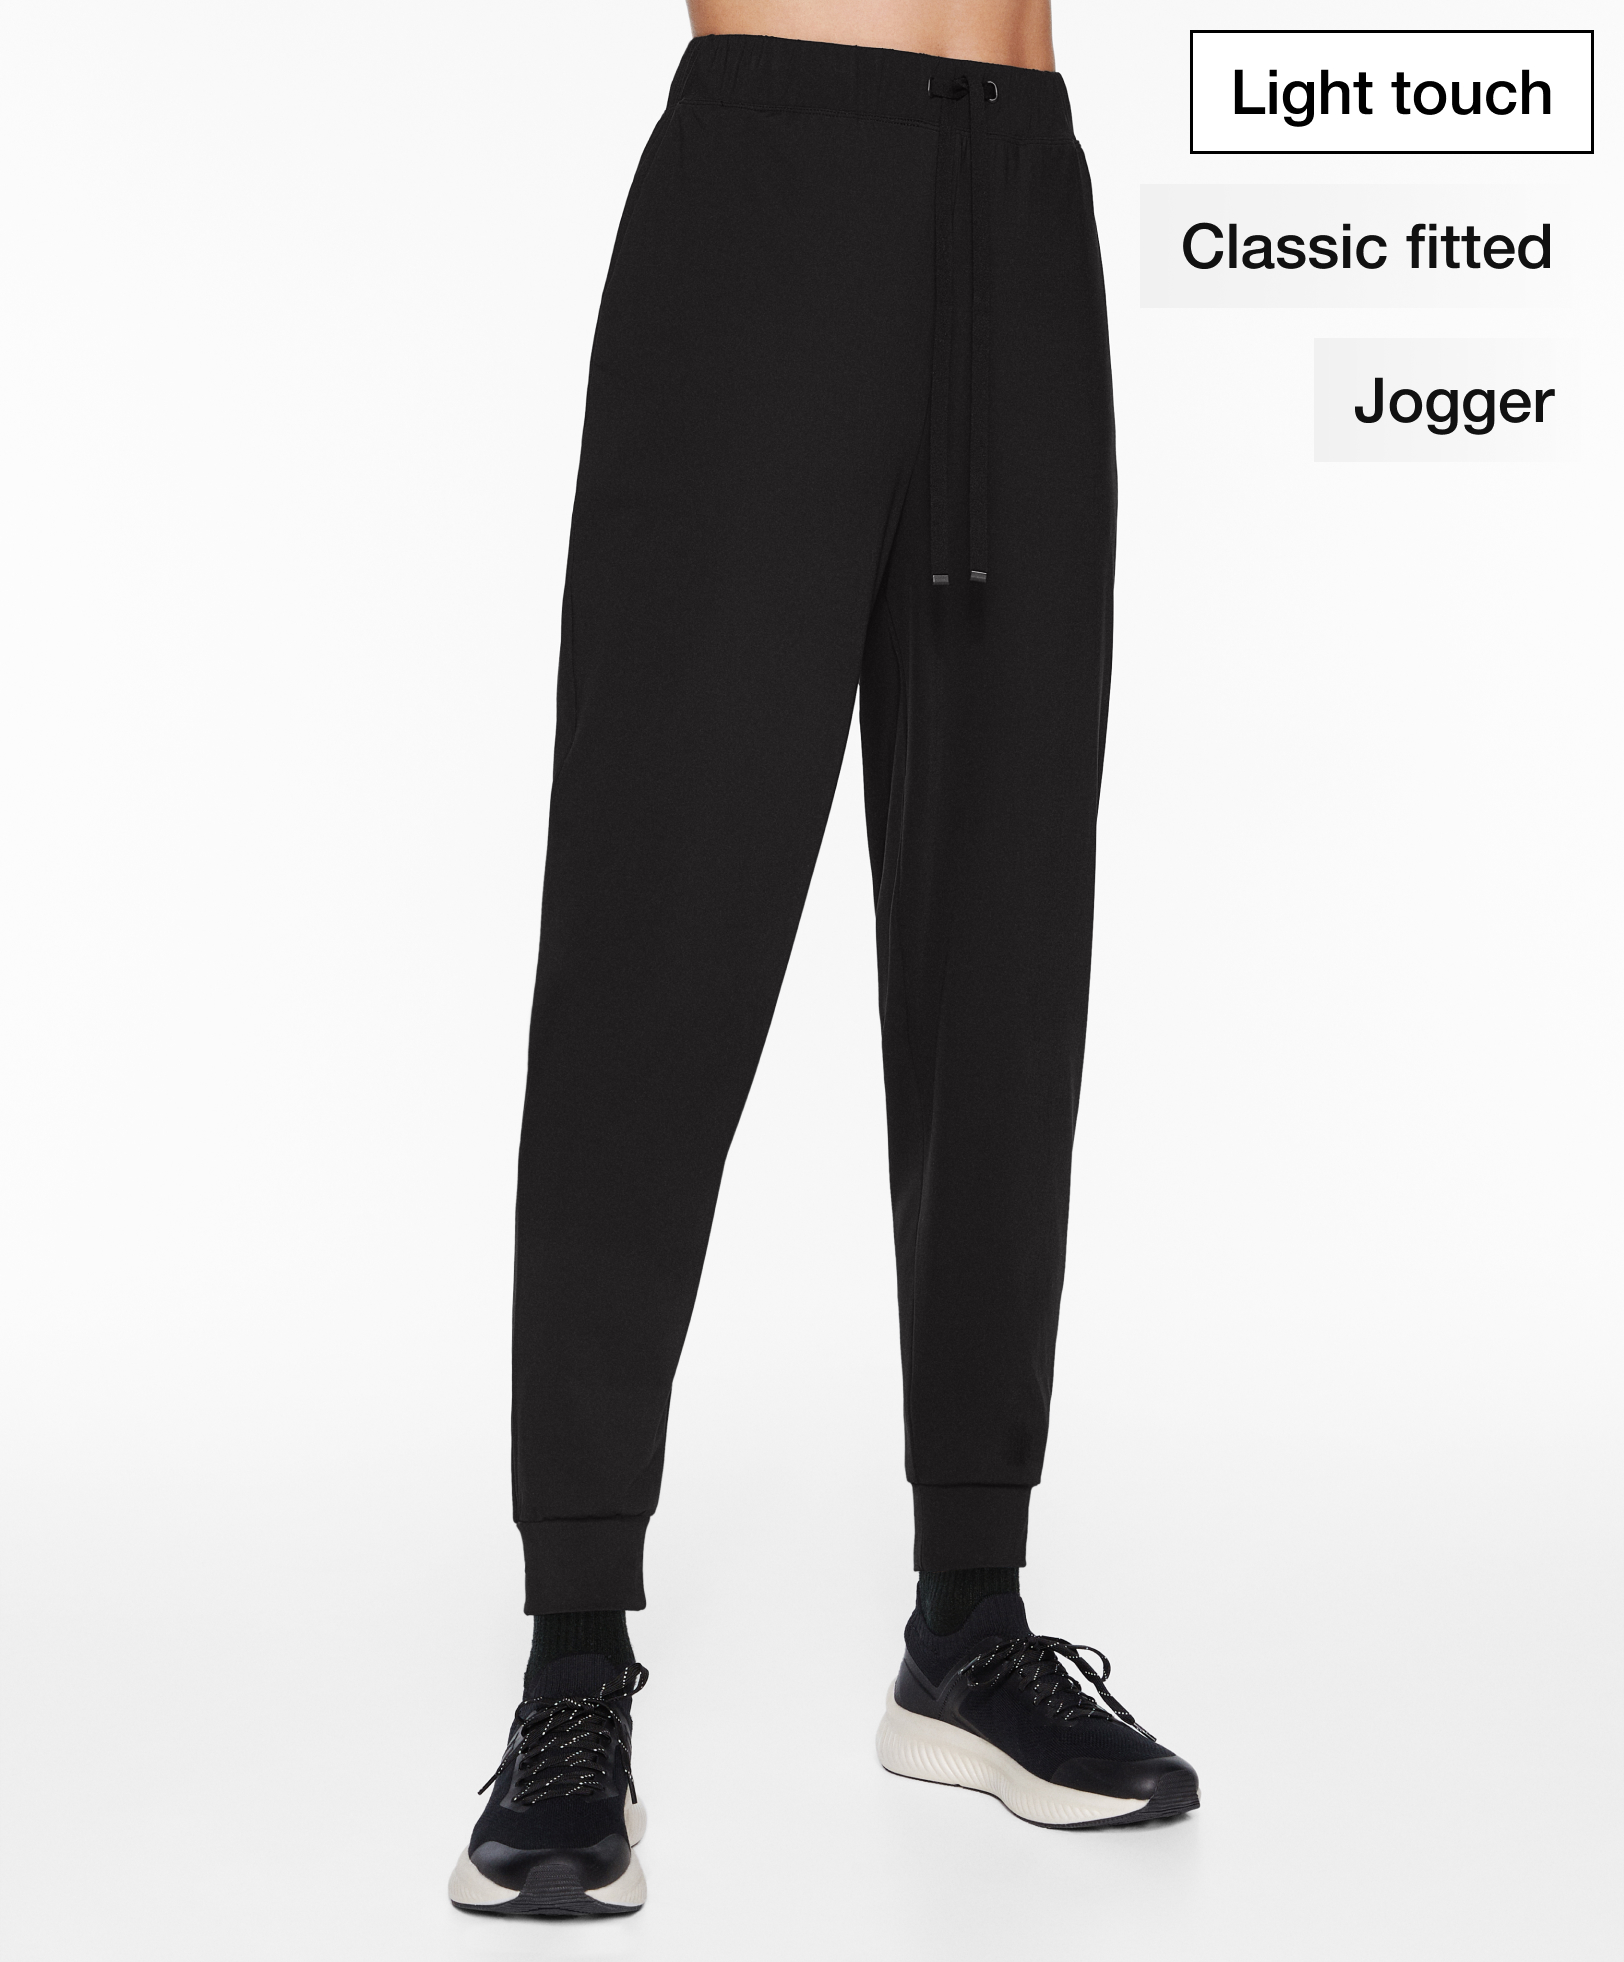 Pantalon jogger classic fitted light touch